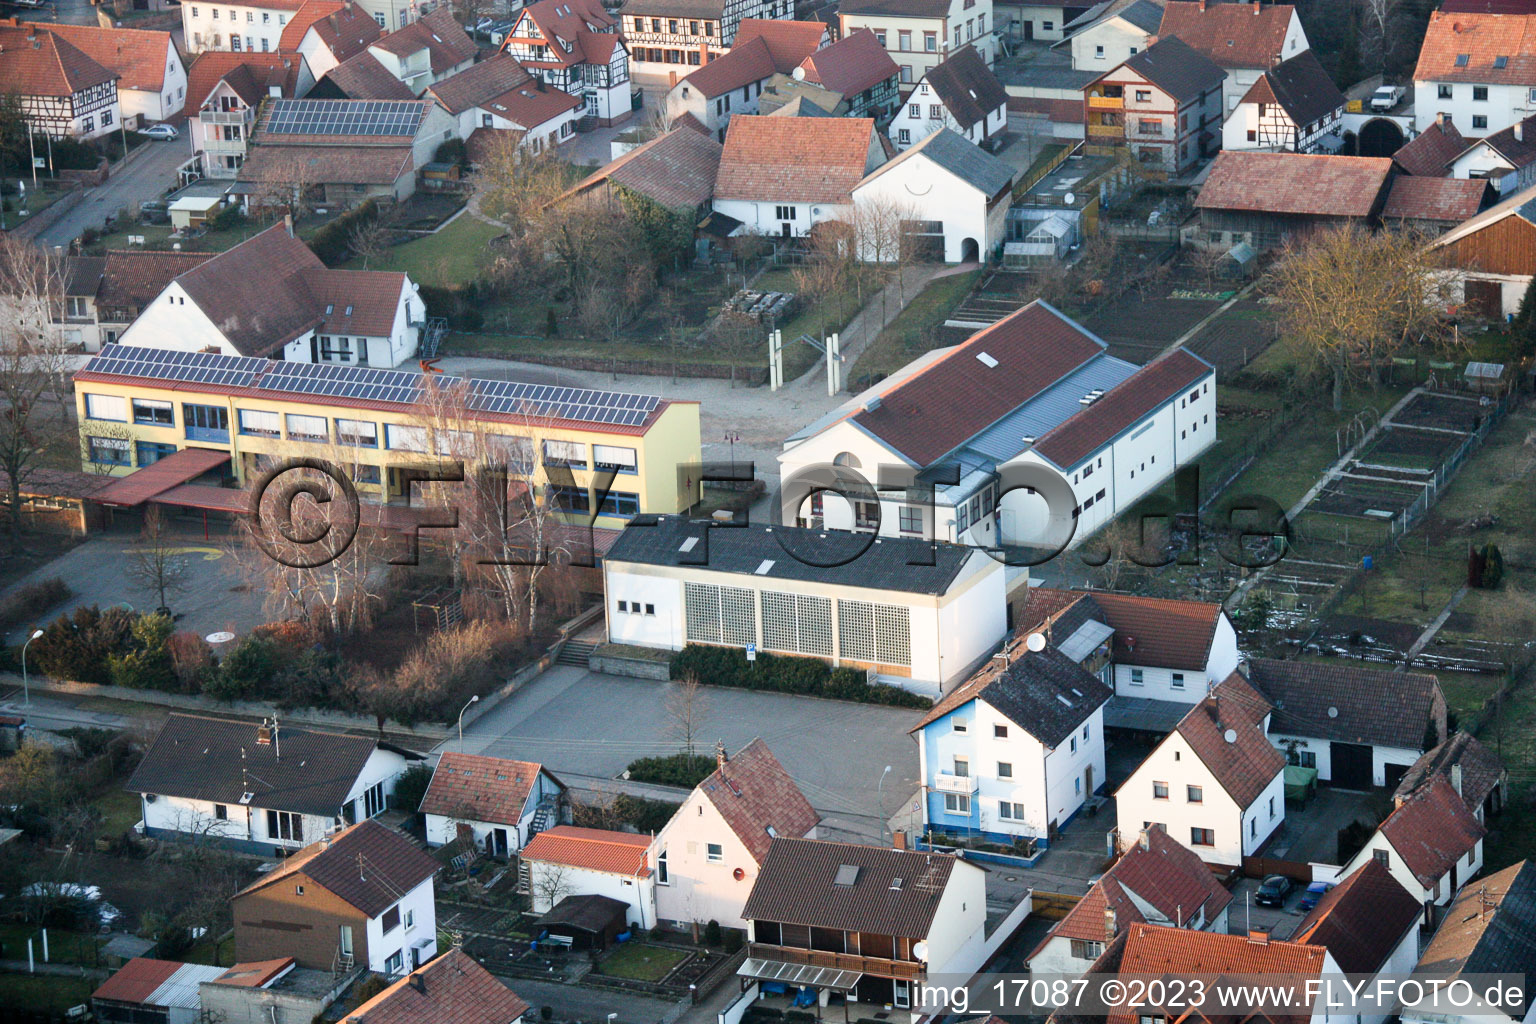 Oblique view of Fire department, sports hall in Minfeld in the state Rhineland-Palatinate, Germany